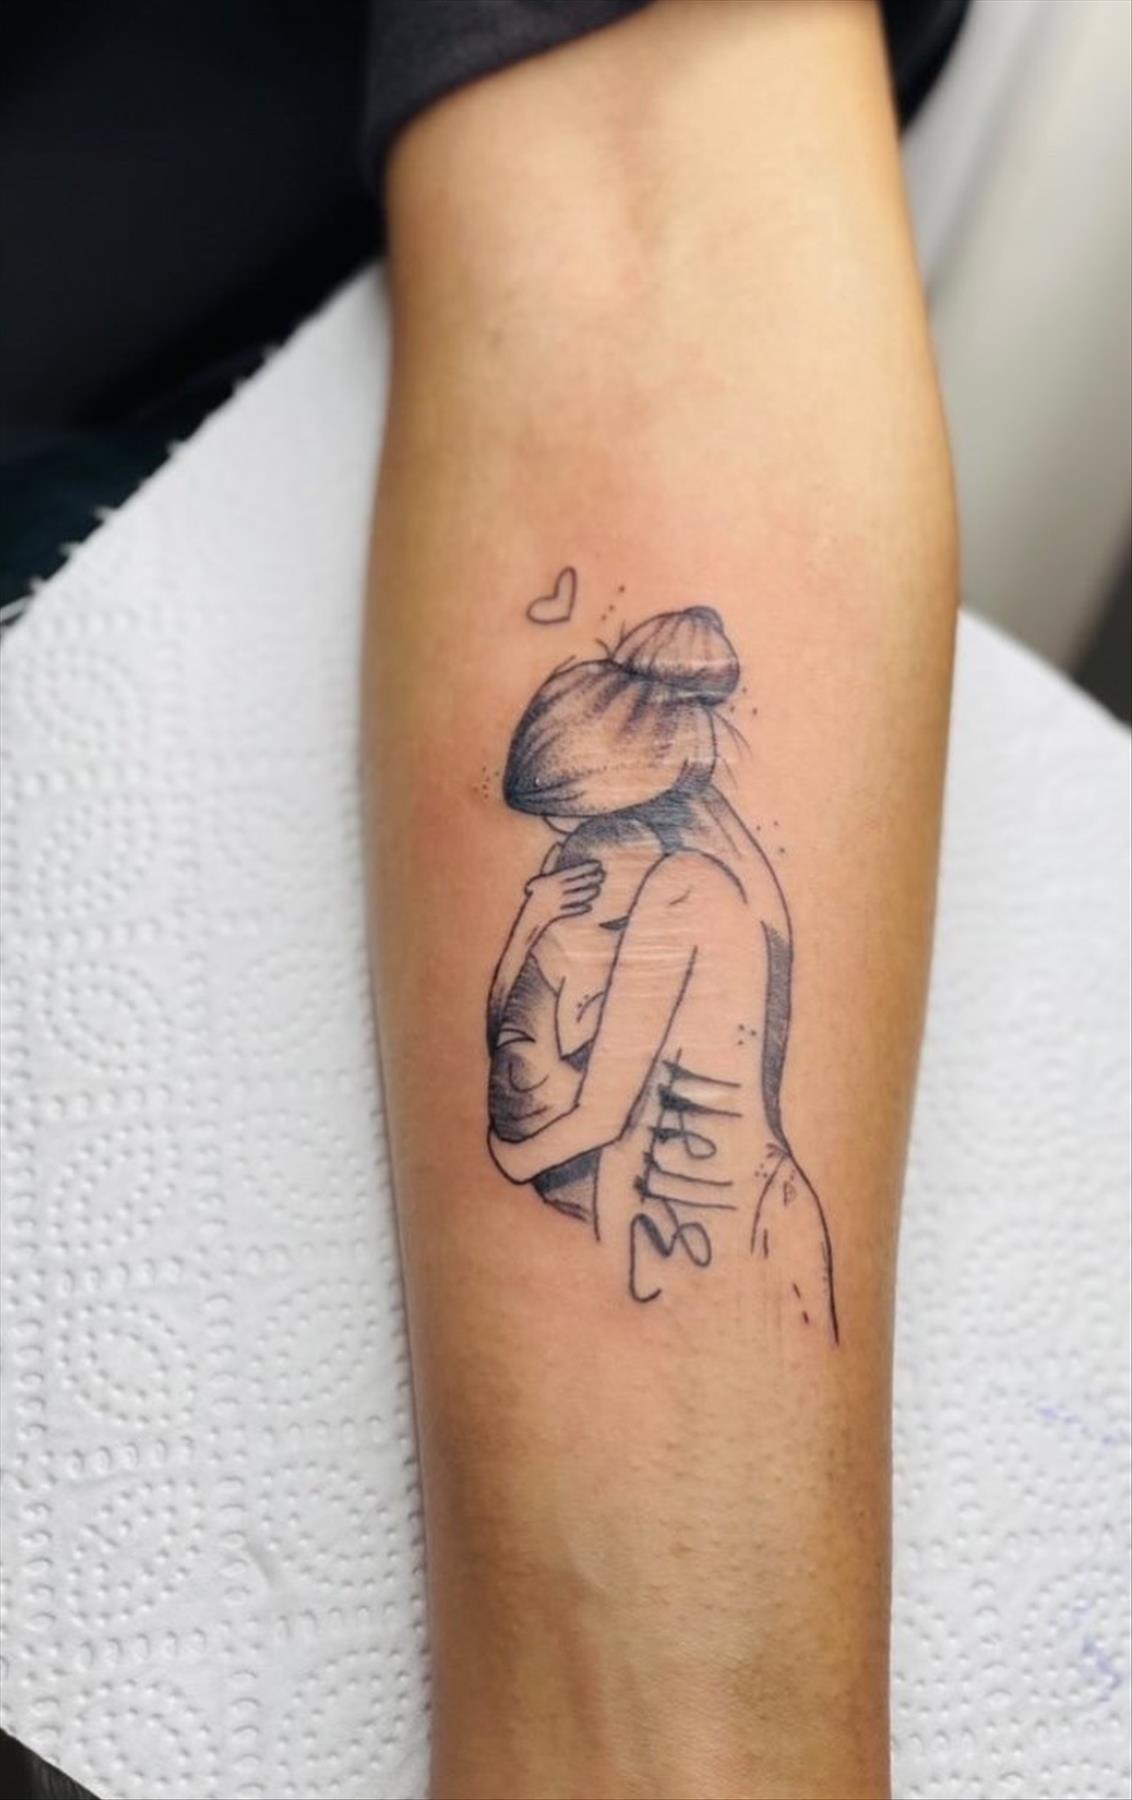 Meaningful and unique tattoos for moms with kids